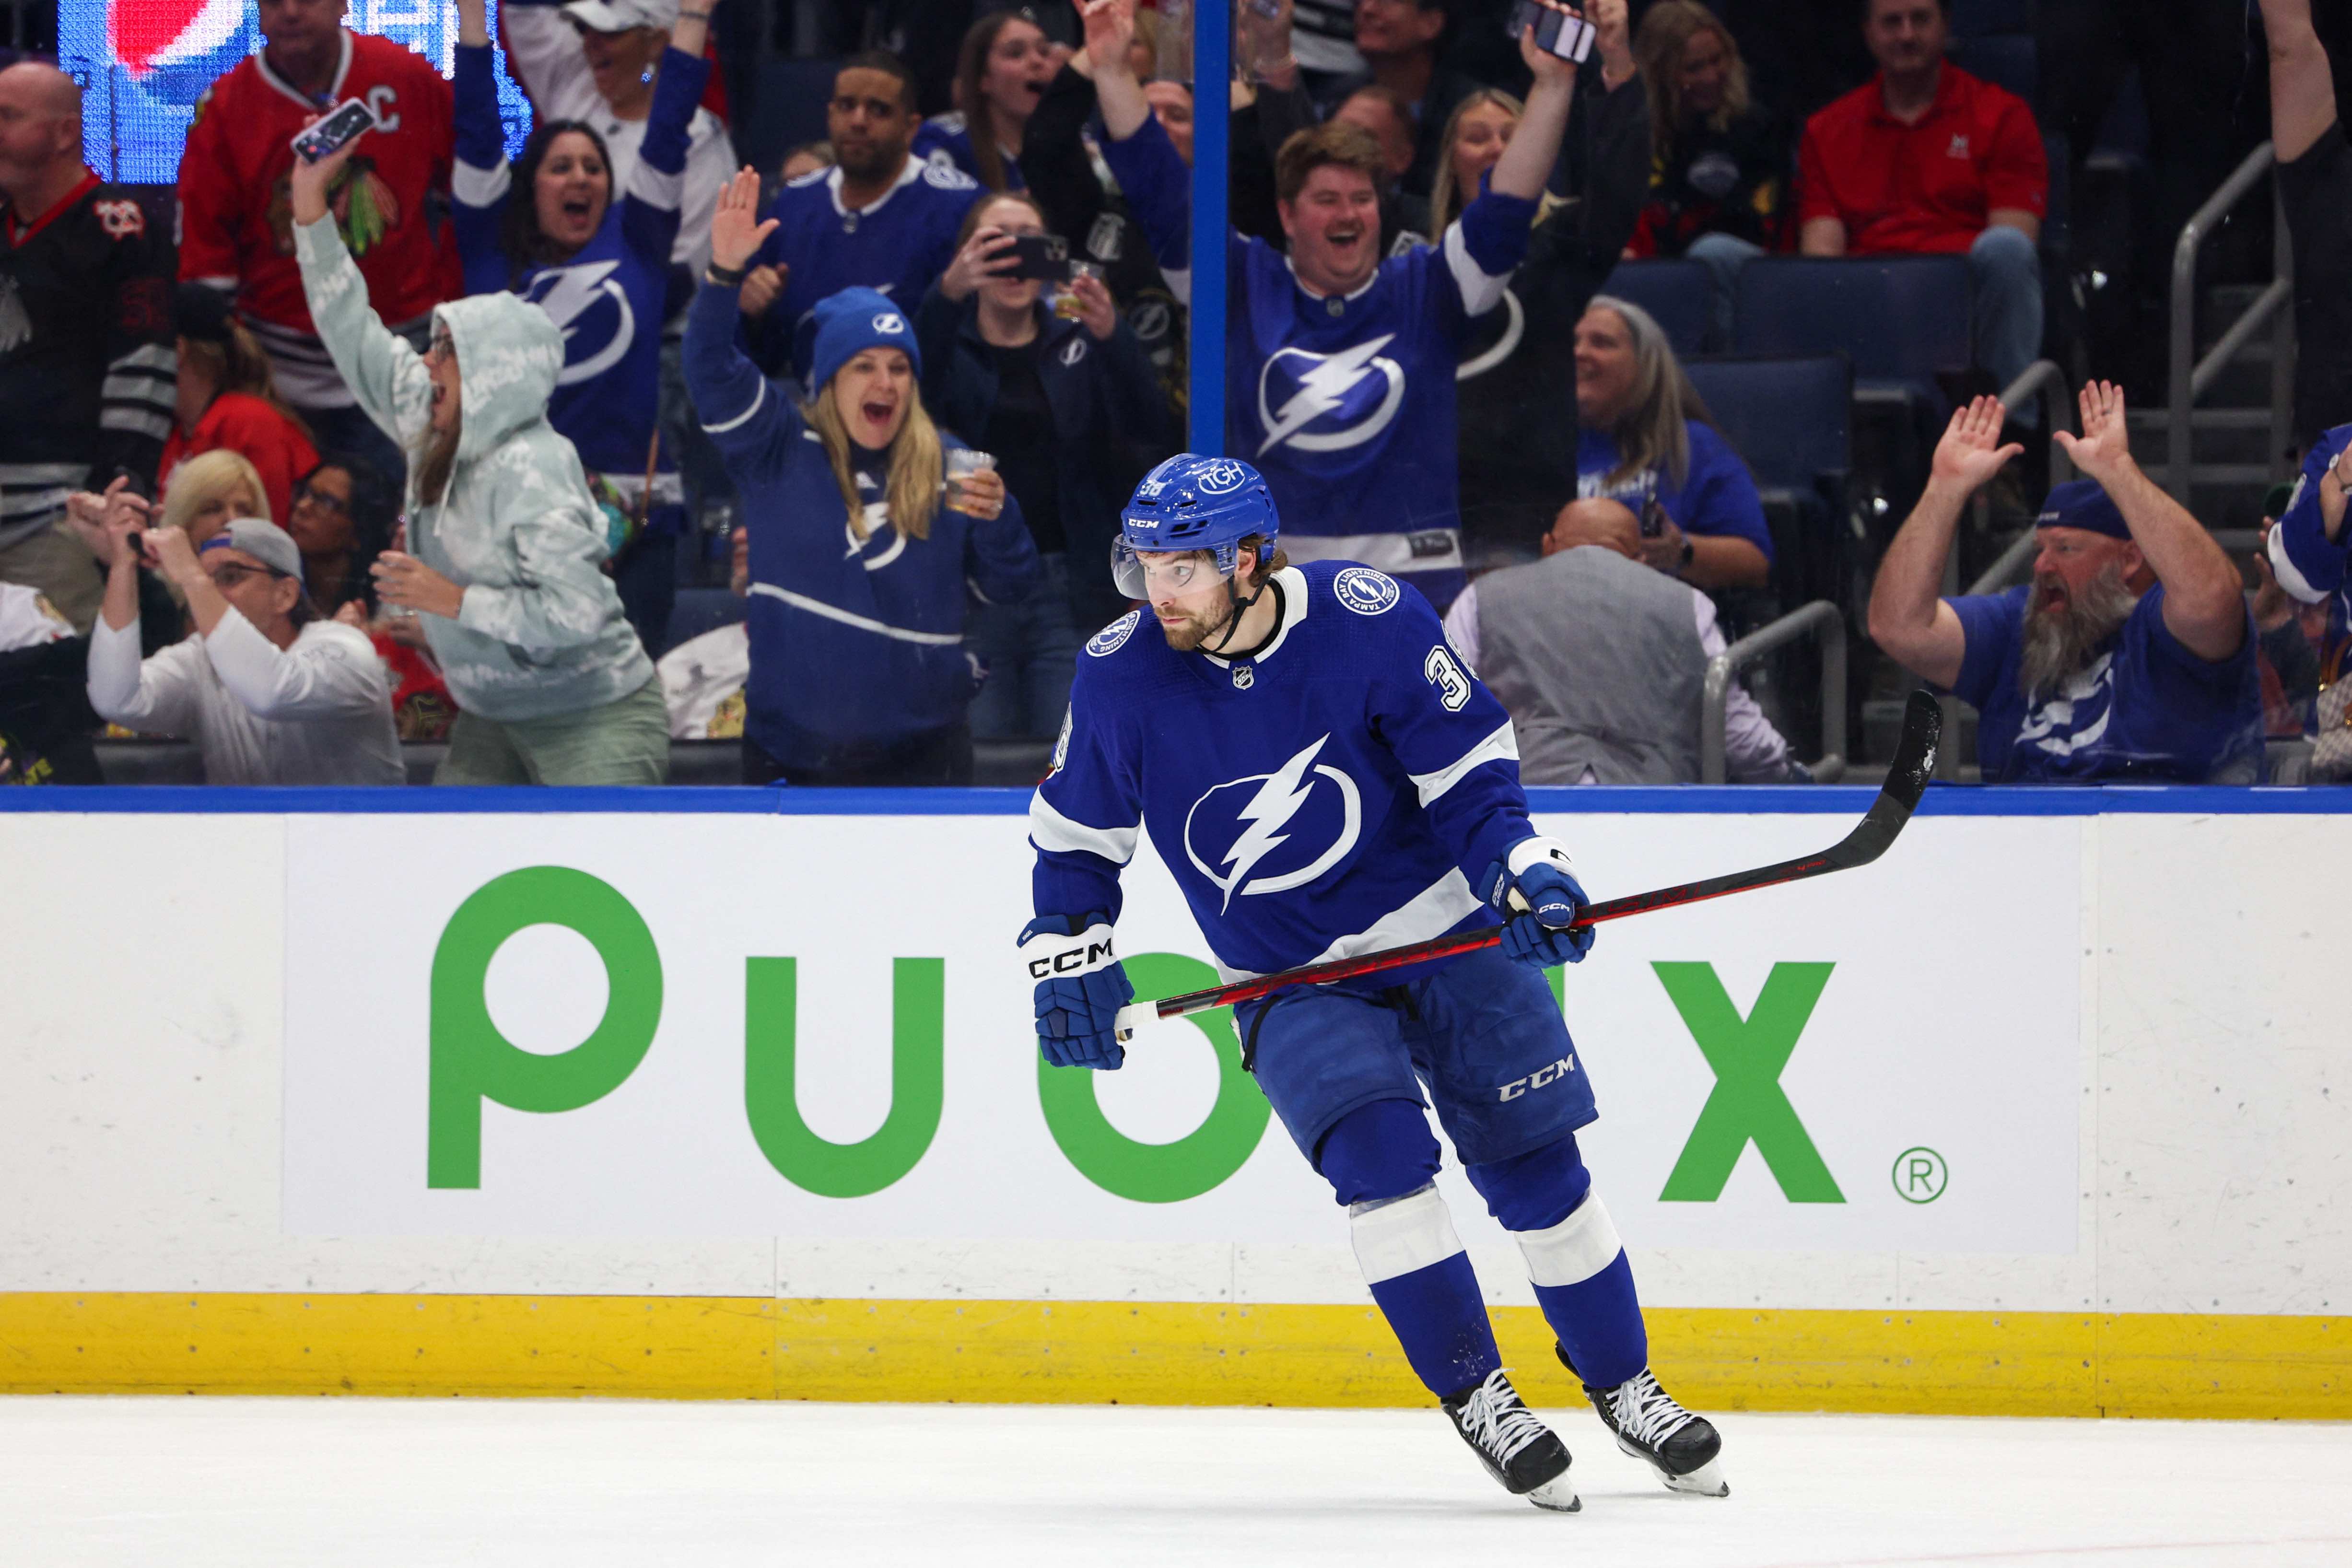 Lightning sign Brandon Hagel to an eight-year contract extension